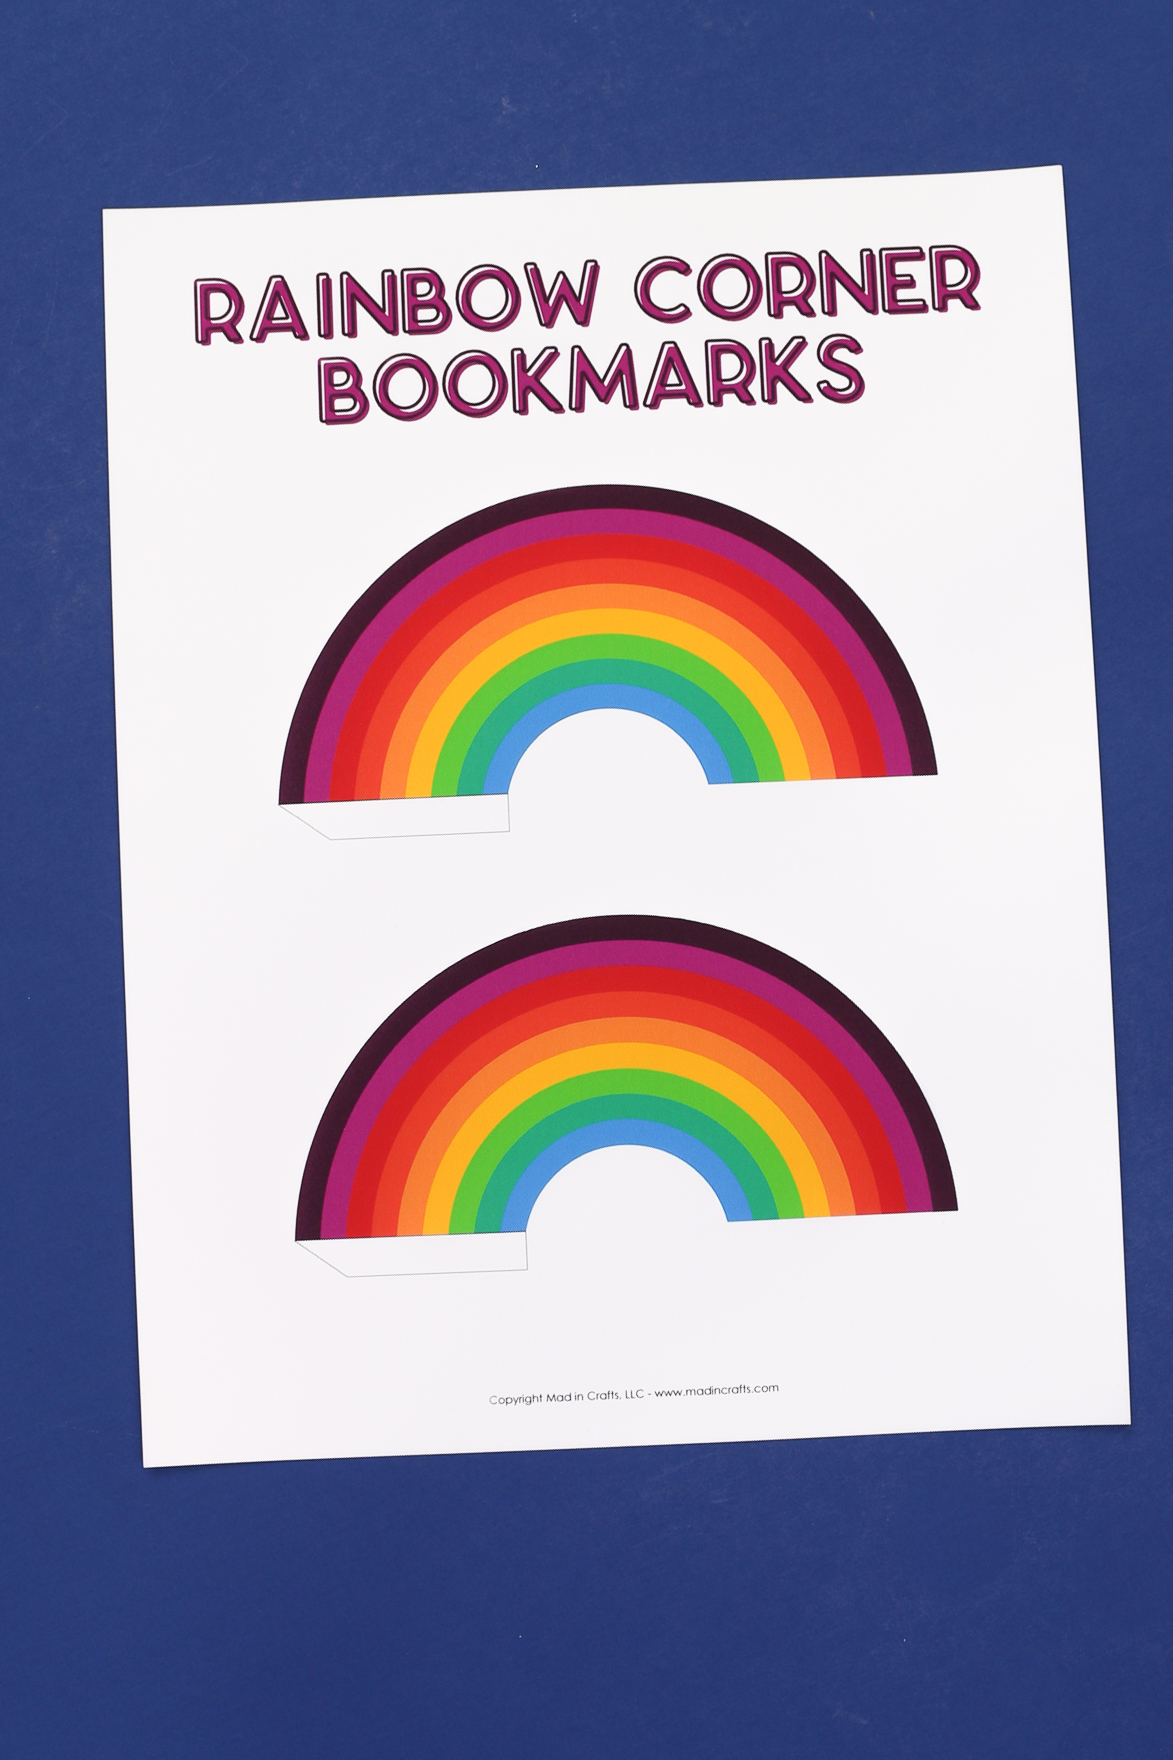 a printed paper with rainbow corner bookmarks